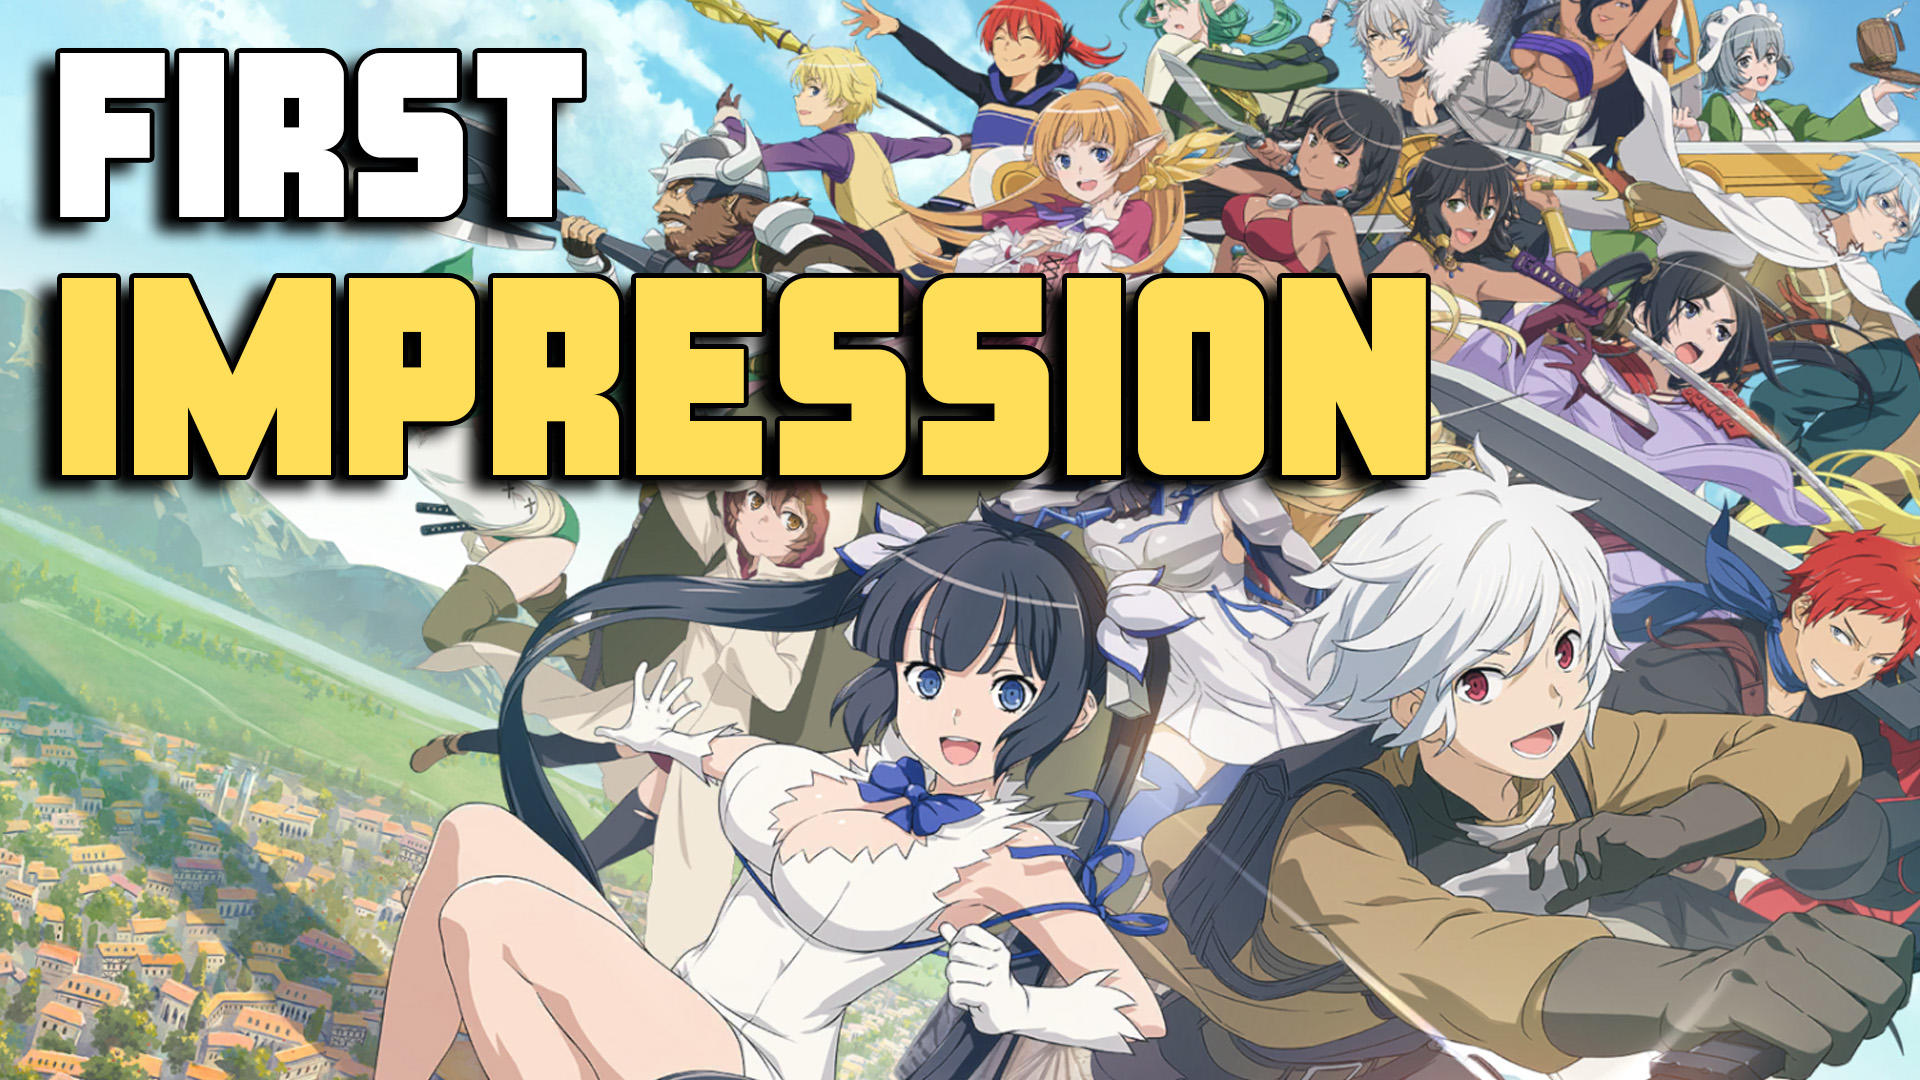 Danmachi: Infinite Combate/PC Gameplay - Part 120- Go Out Event